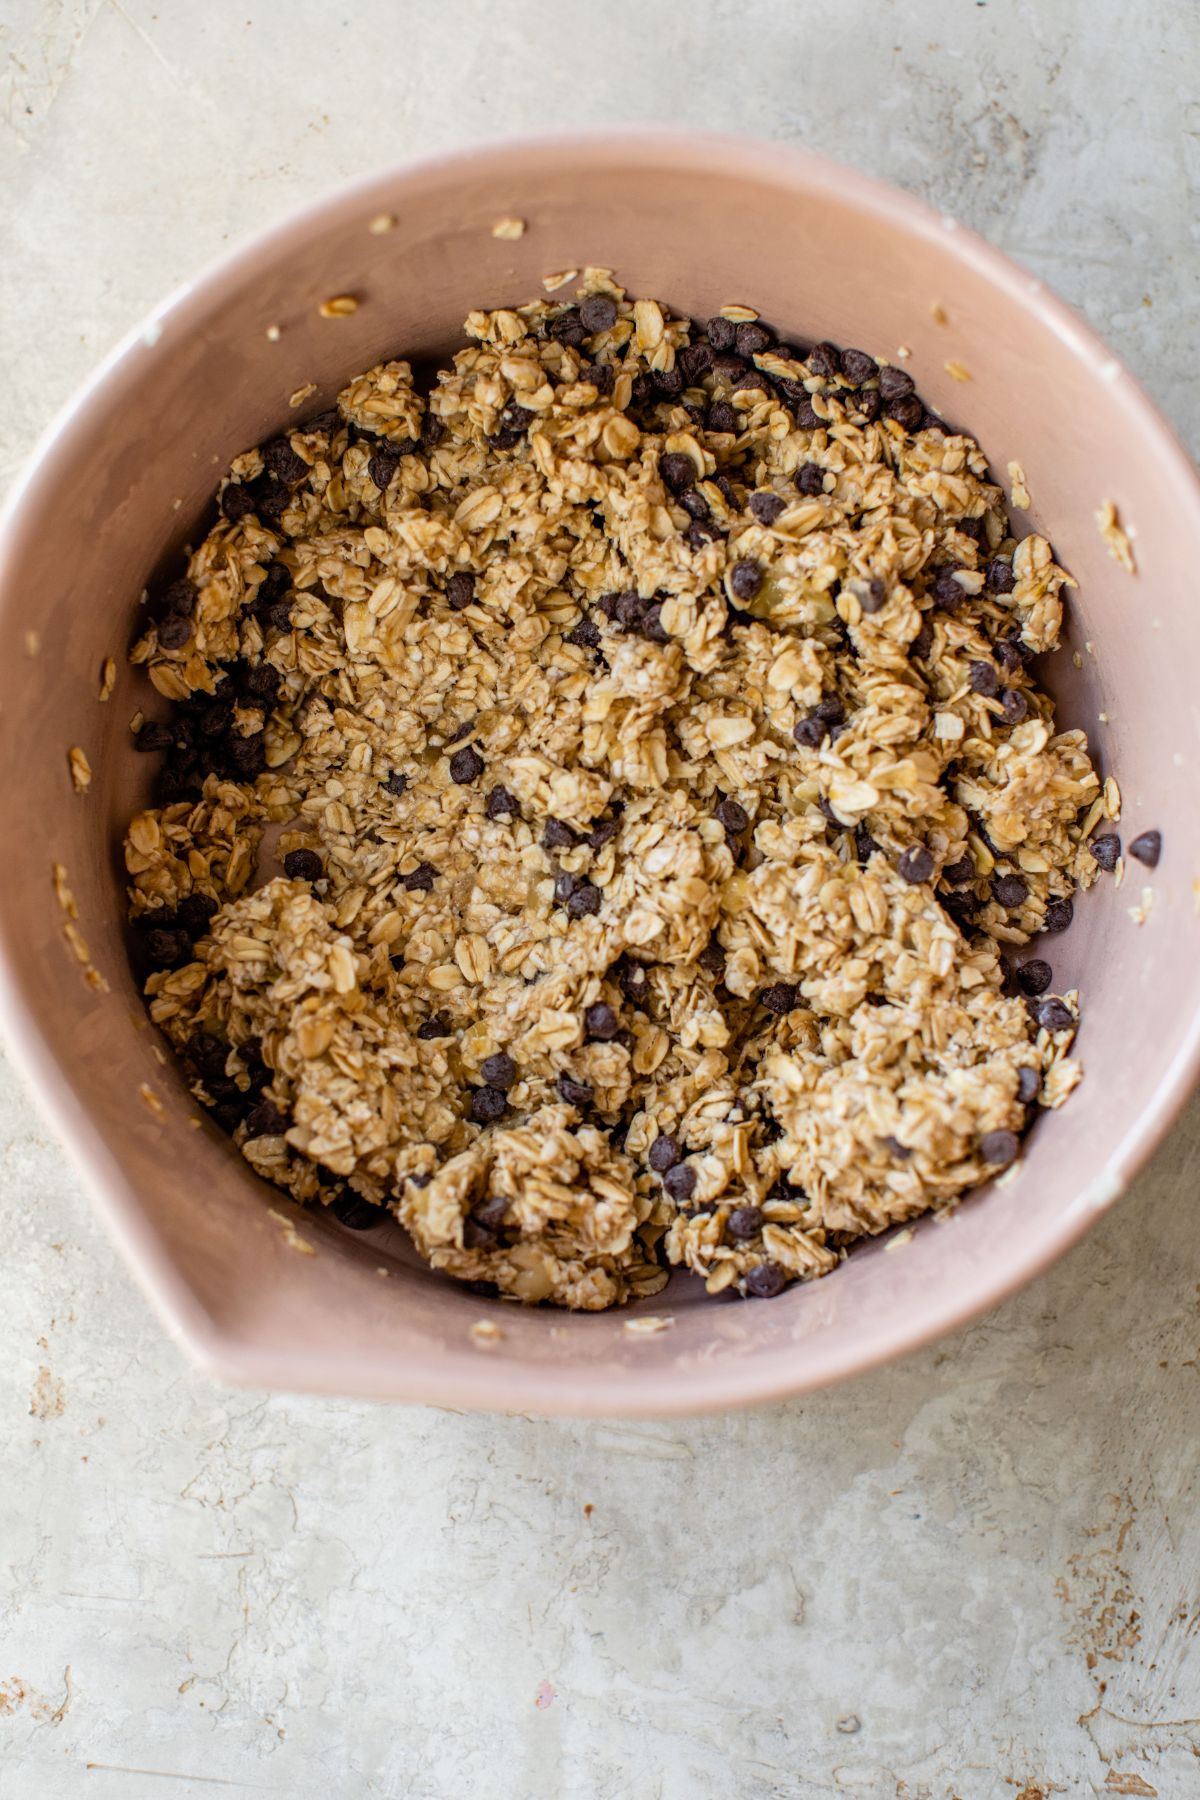 An oat, banana, chocolate chip batter in a bowl.